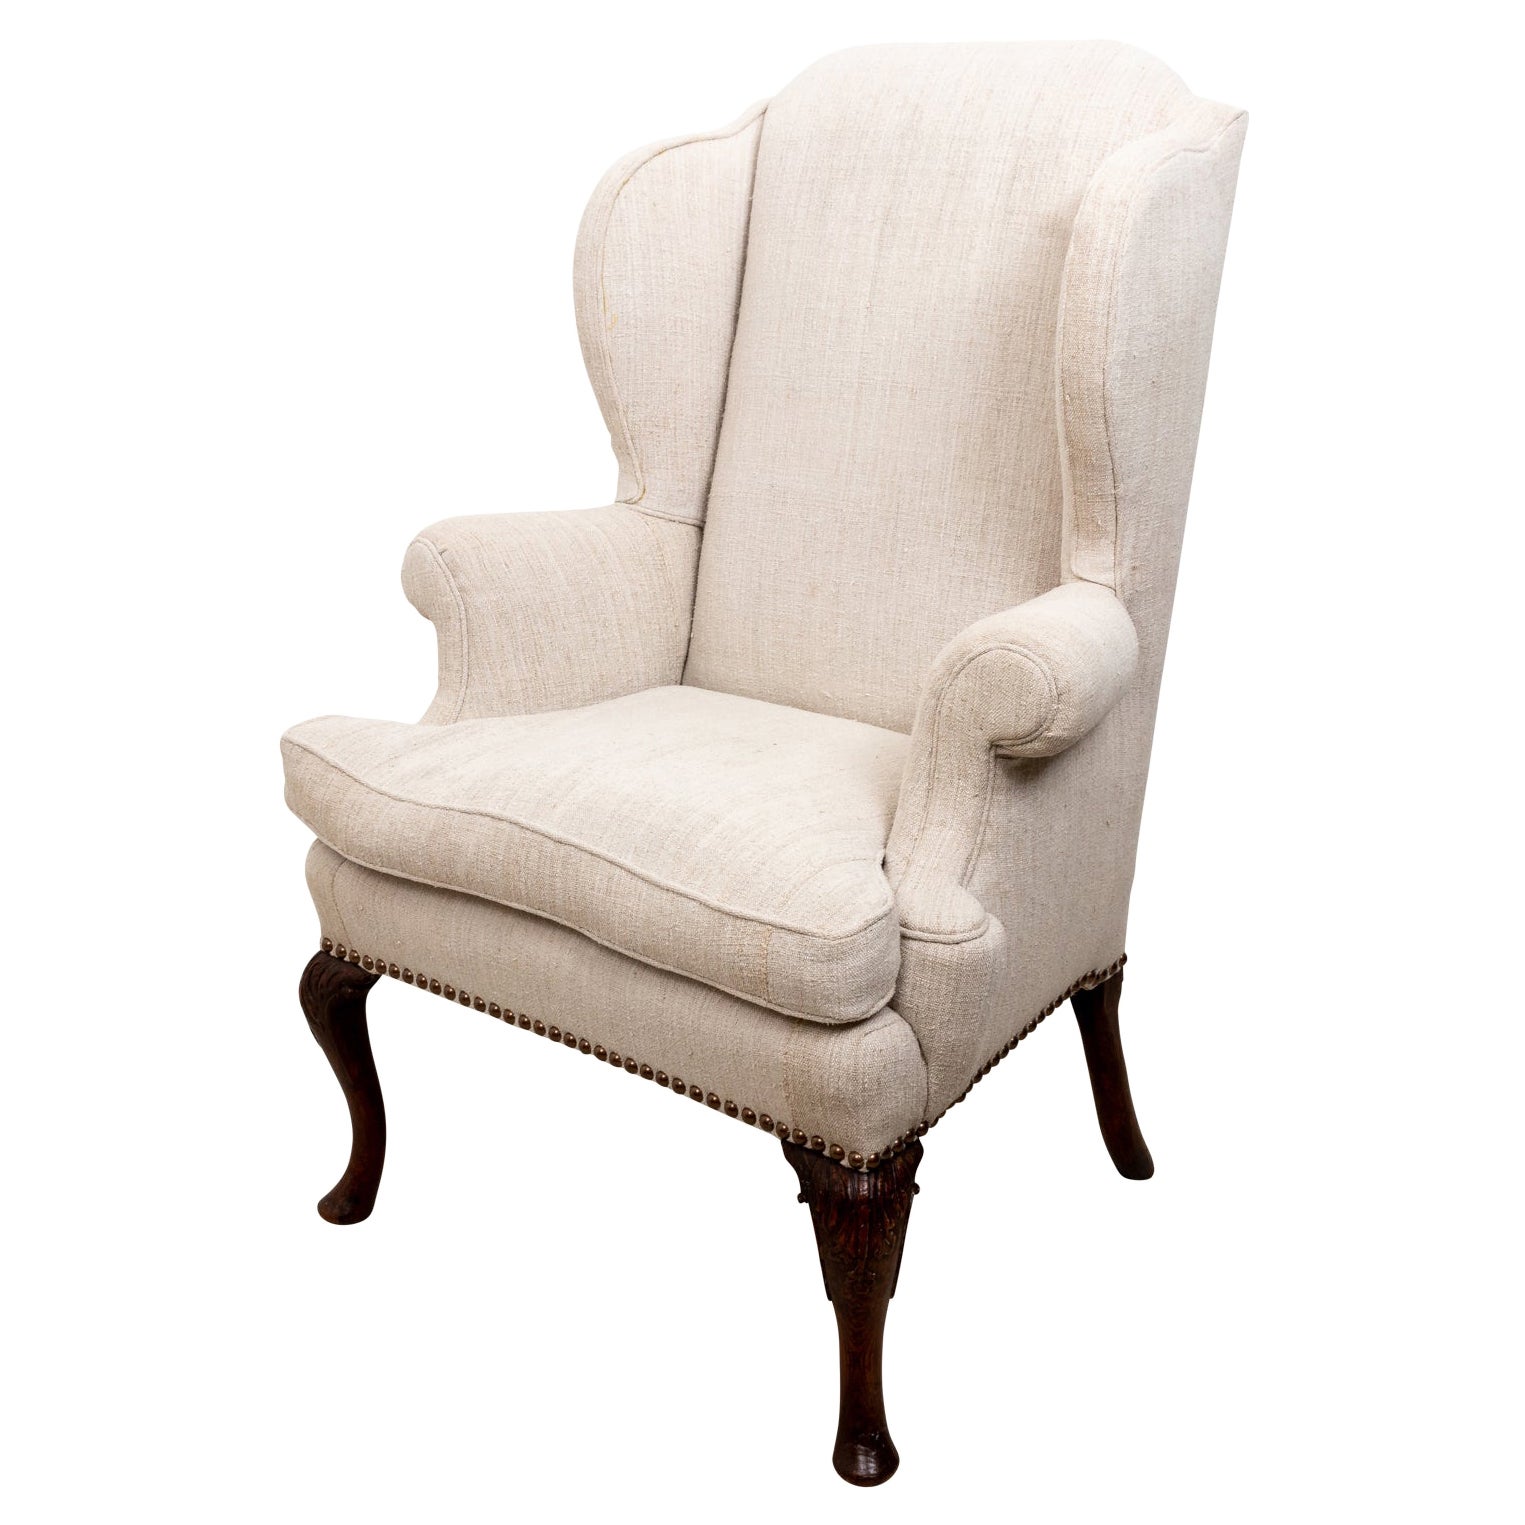 Belgian Linen Covered English Wing Back Armchair